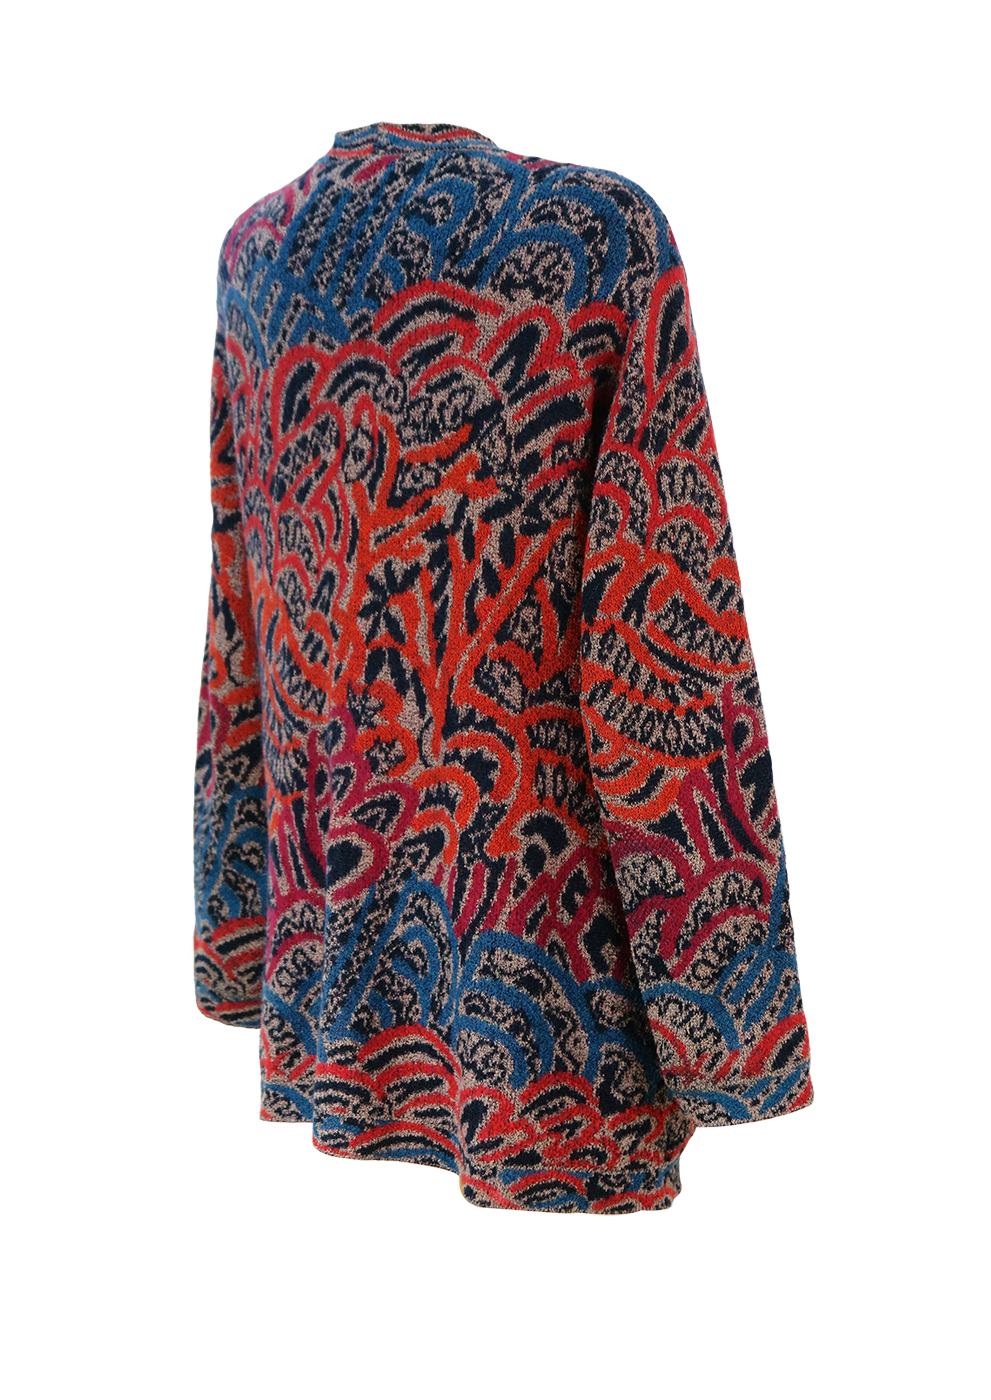 Missoni Sport 3/4 Length Cardigan with Orange, Blue and Cherry Red ...